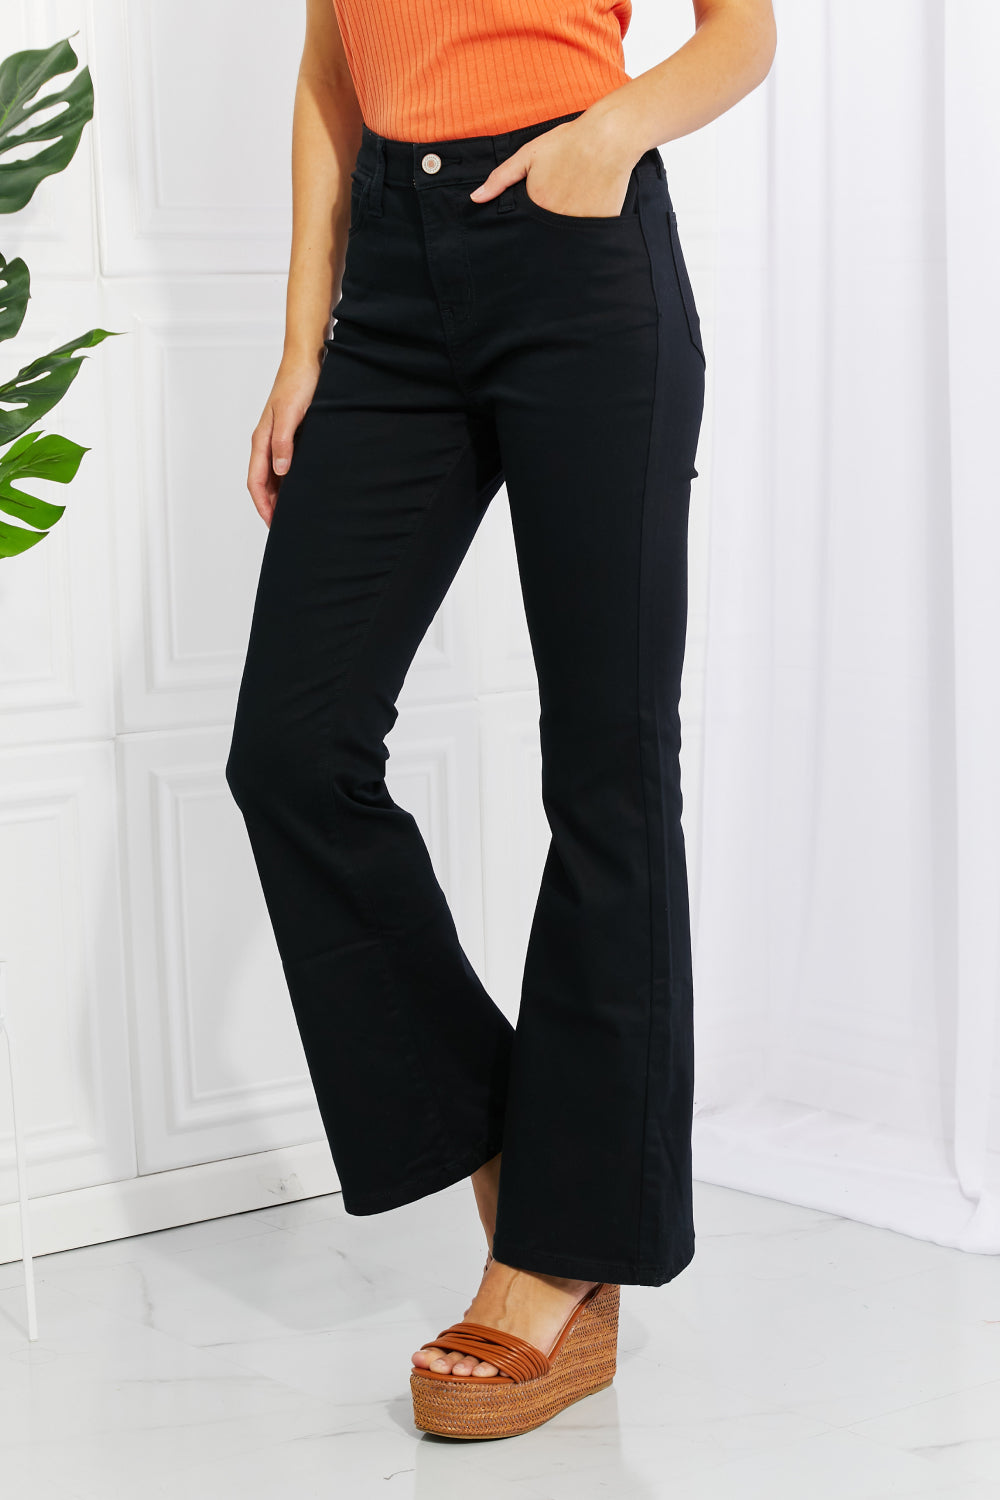 Zenana Clementine Full Size High-Rise Bootcut Pants in Black